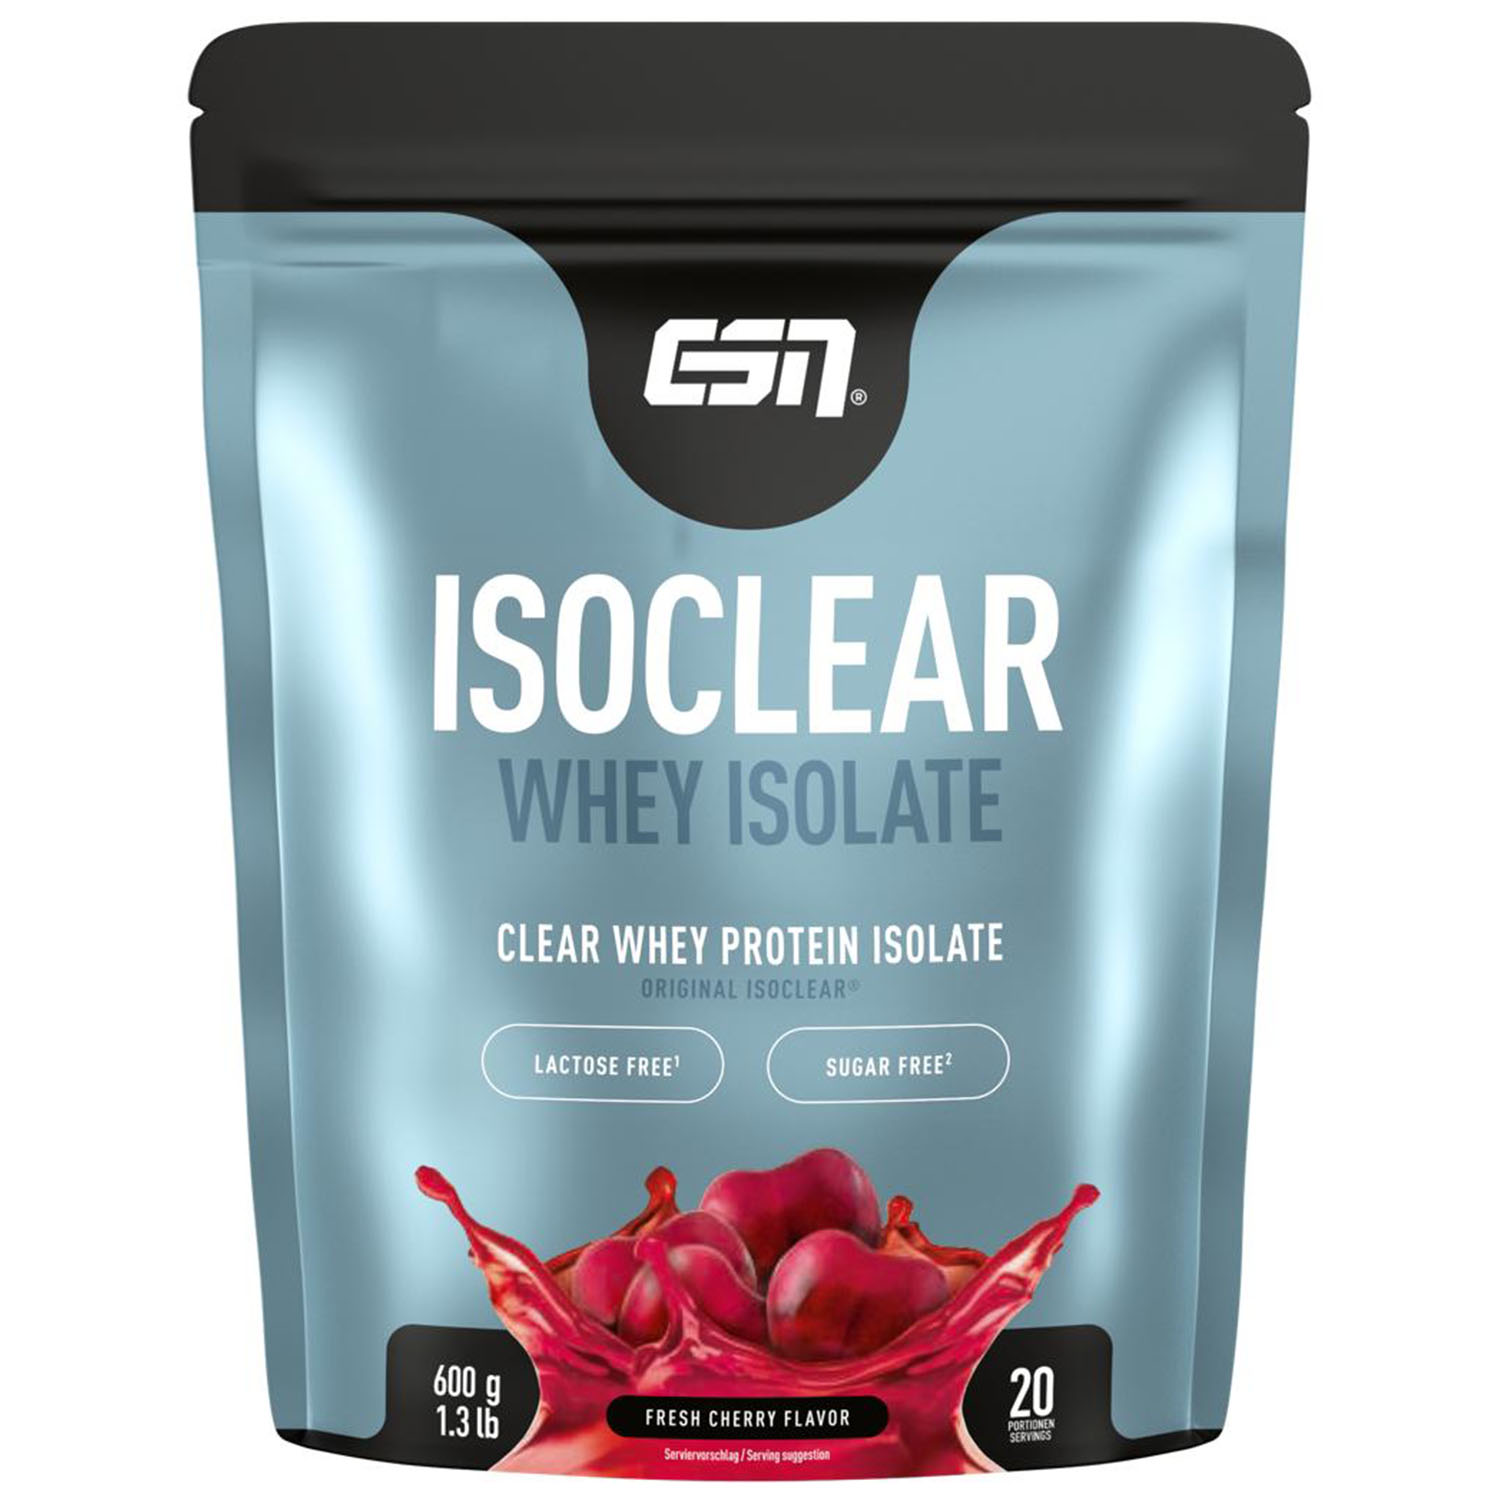 ESN Supplement Isoclear Whey Isolate, 600g